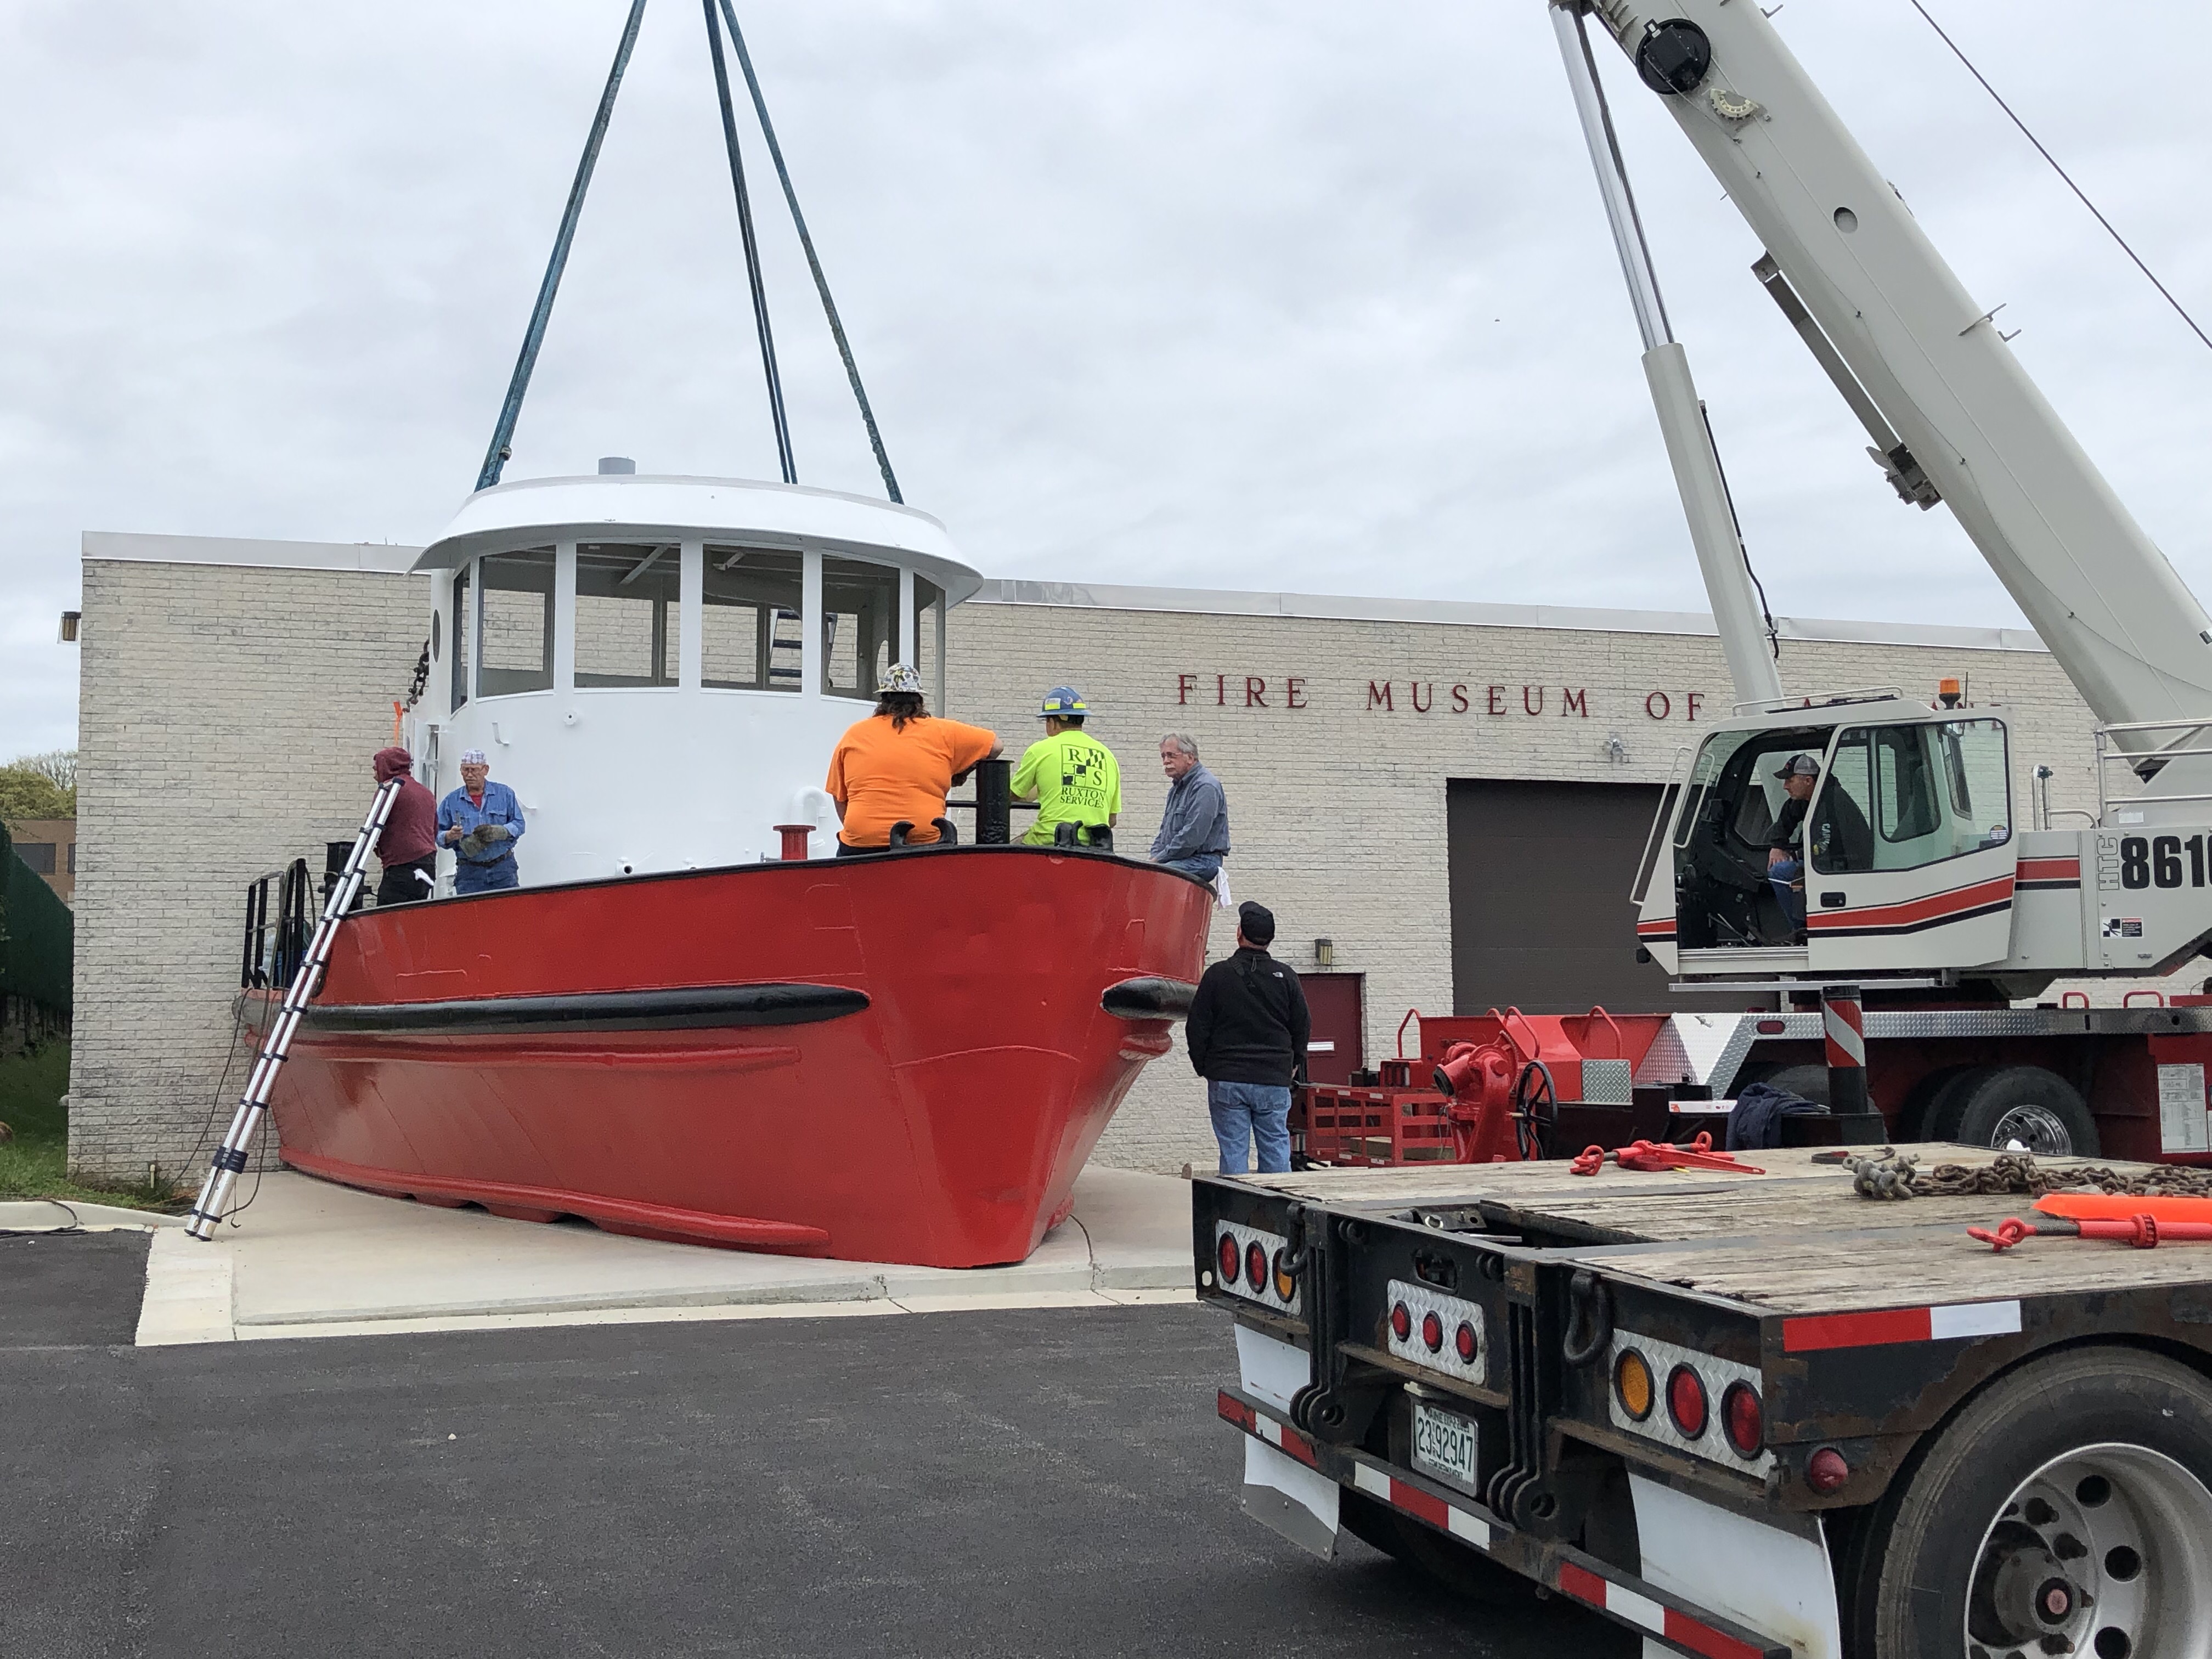 VIDEO: Baltimore Fireboat Travels by Highway to Home of New Exhibit